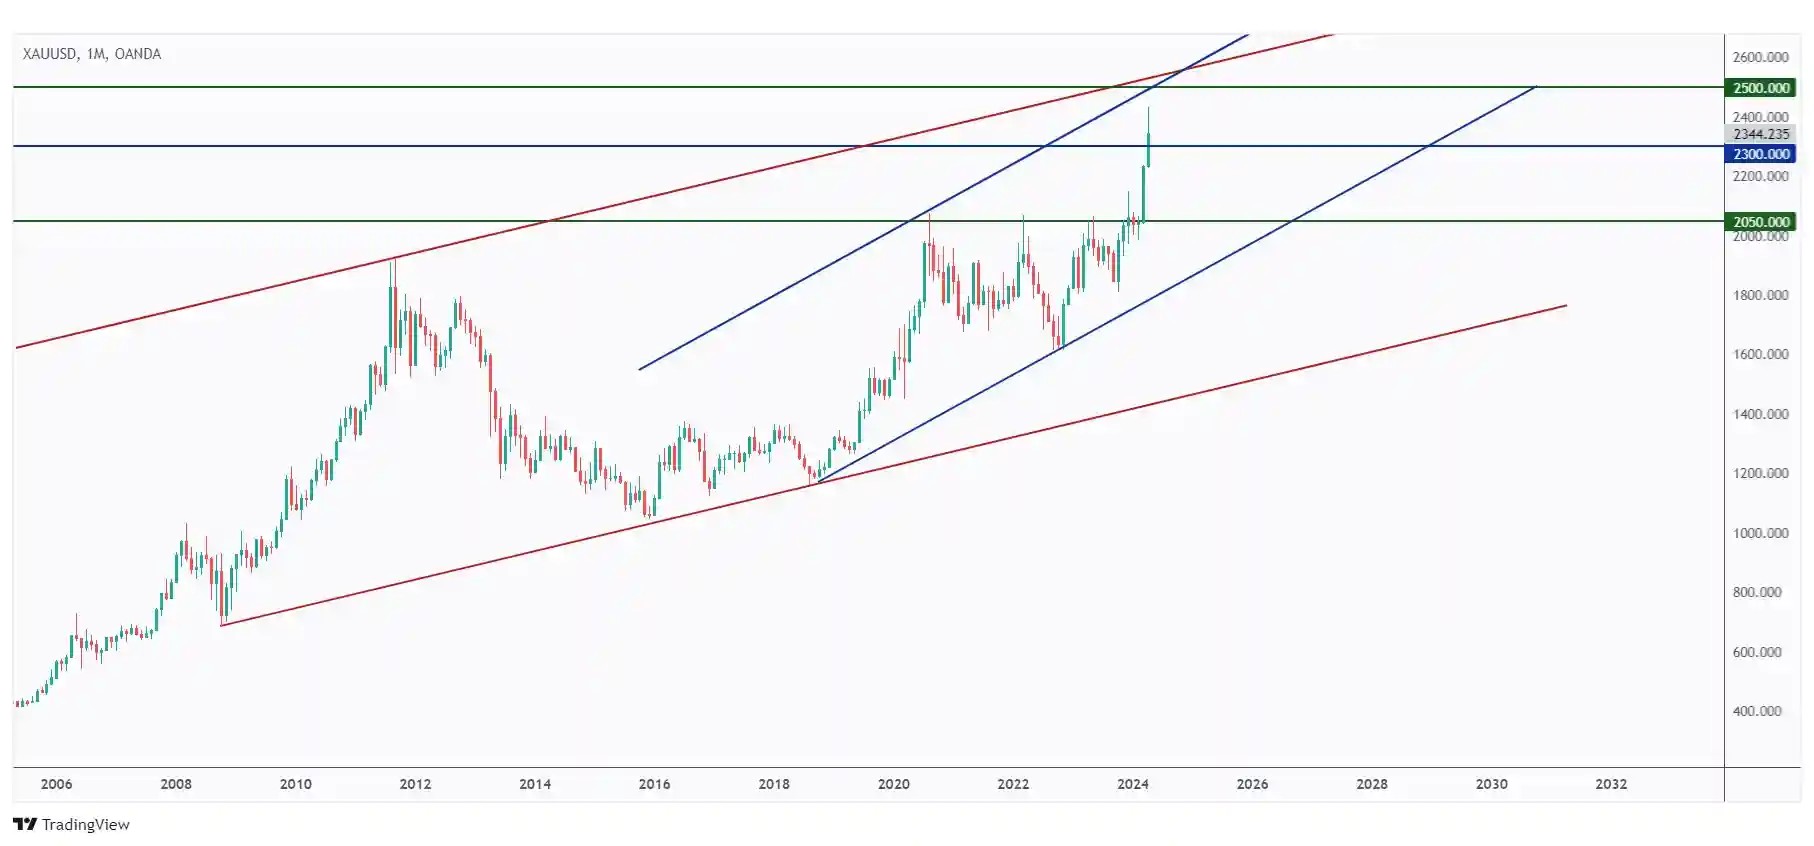 Gold monthly chart approaching an over-bought zone covering the intersection of the upper bound of two channels.